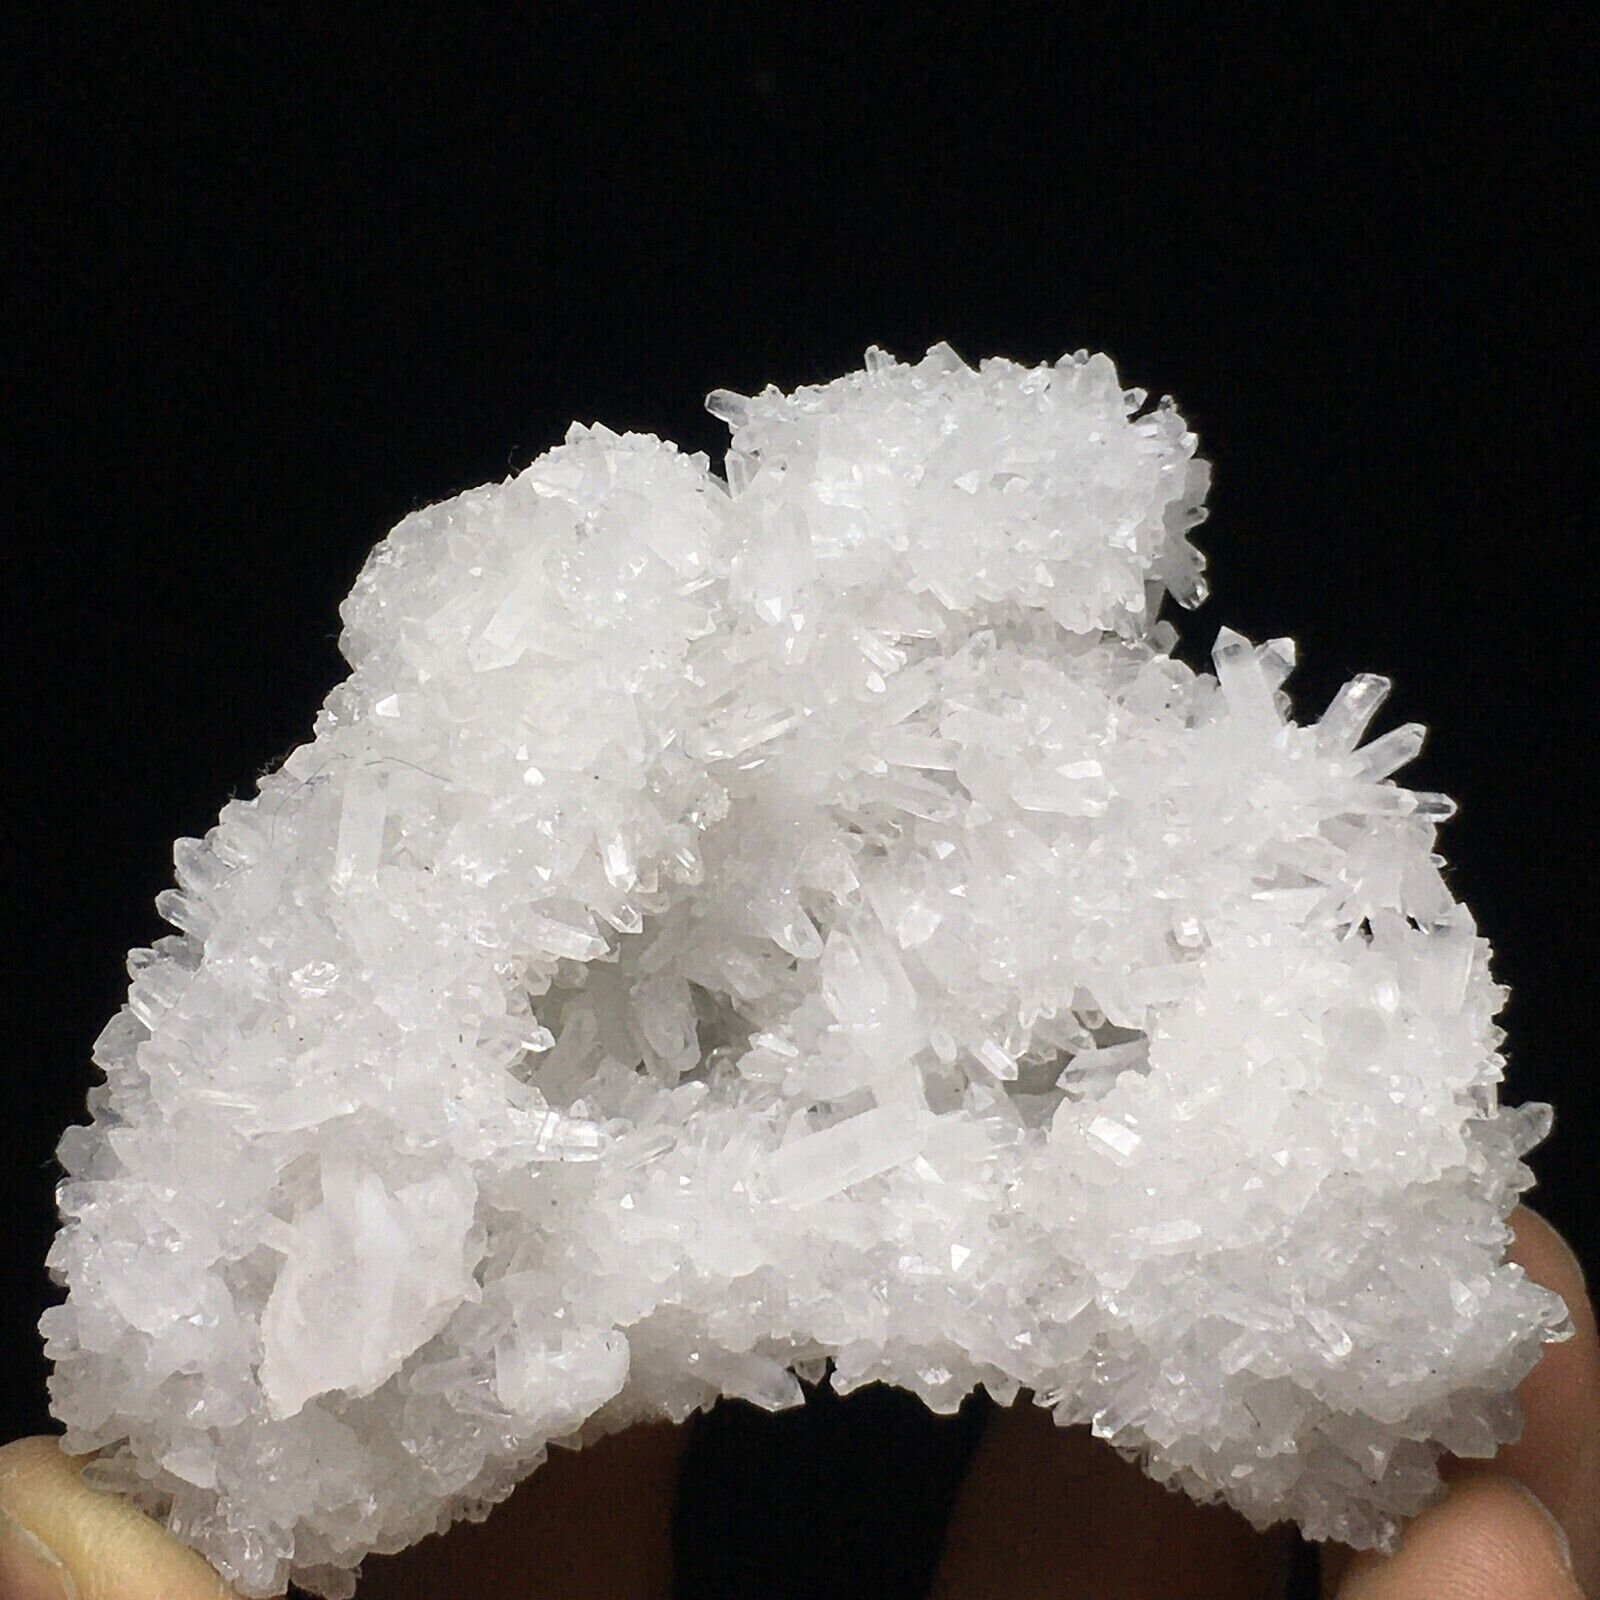 130g The Newly Discovered Chrysanthemum Crystals Contain Flaky Calcite